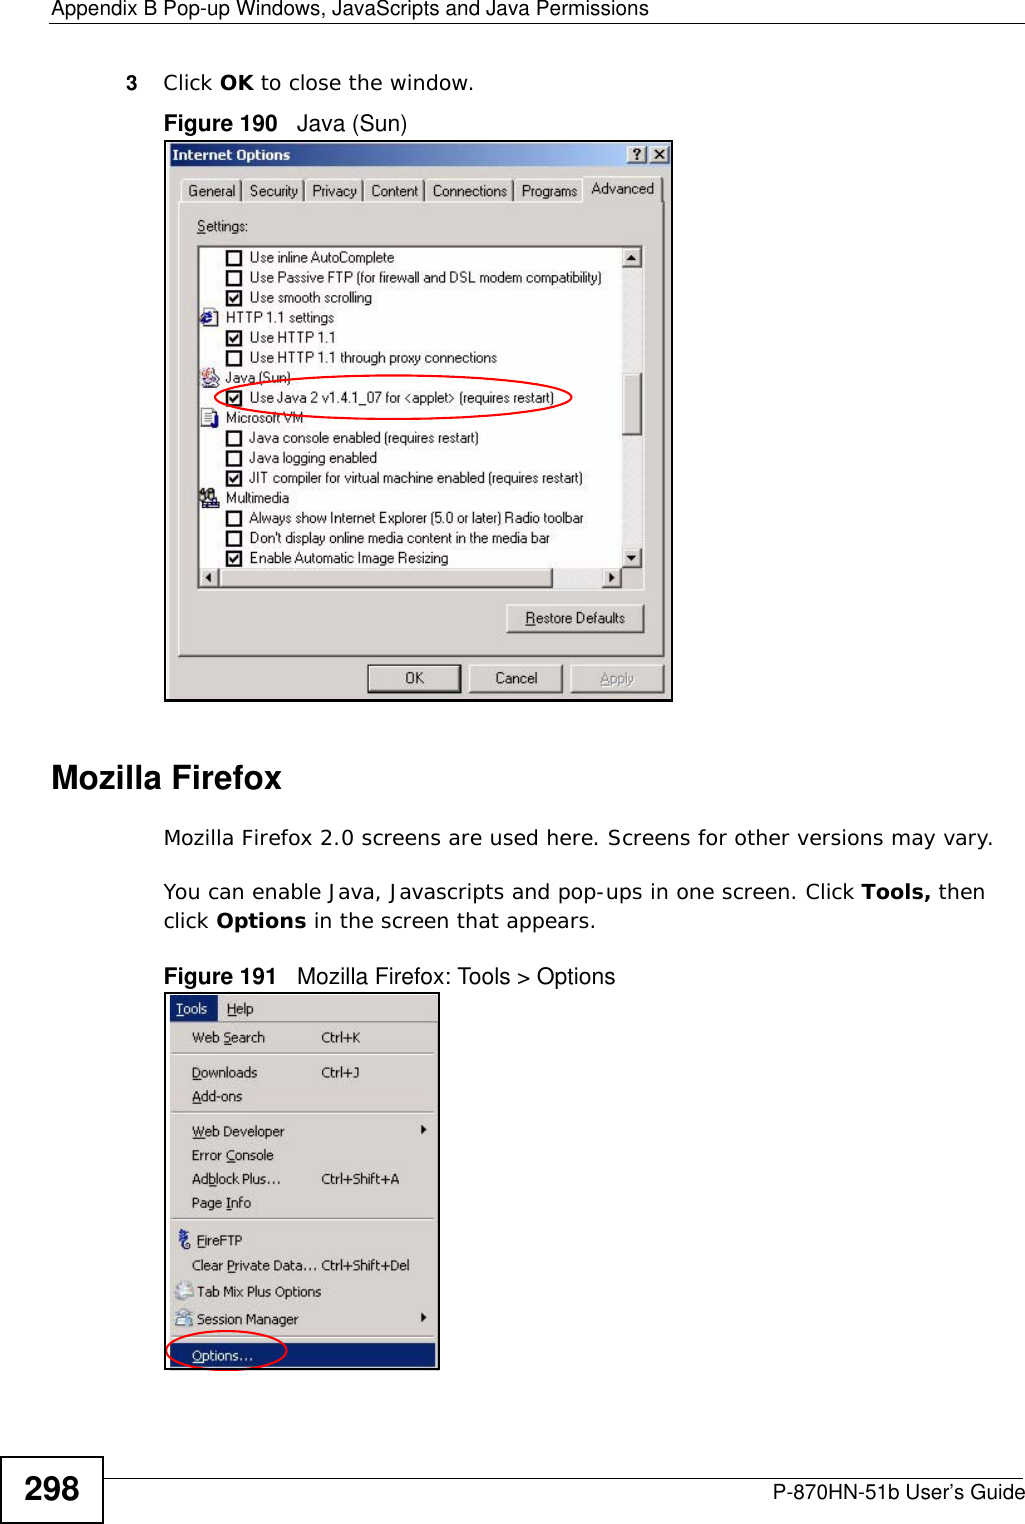 Appendix B Pop-up Windows, JavaScripts and Java PermissionsP-870HN-51b User’s Guide2983Click OK to close the window.Figure 190   Java (Sun)Mozilla FirefoxMozilla Firefox 2.0 screens are used here. Screens for other versions may vary. You can enable Java, Javascripts and pop-ups in one screen. Click Tools, then click Options in the screen that appears.Figure 191   Mozilla Firefox: Tools &gt; Options